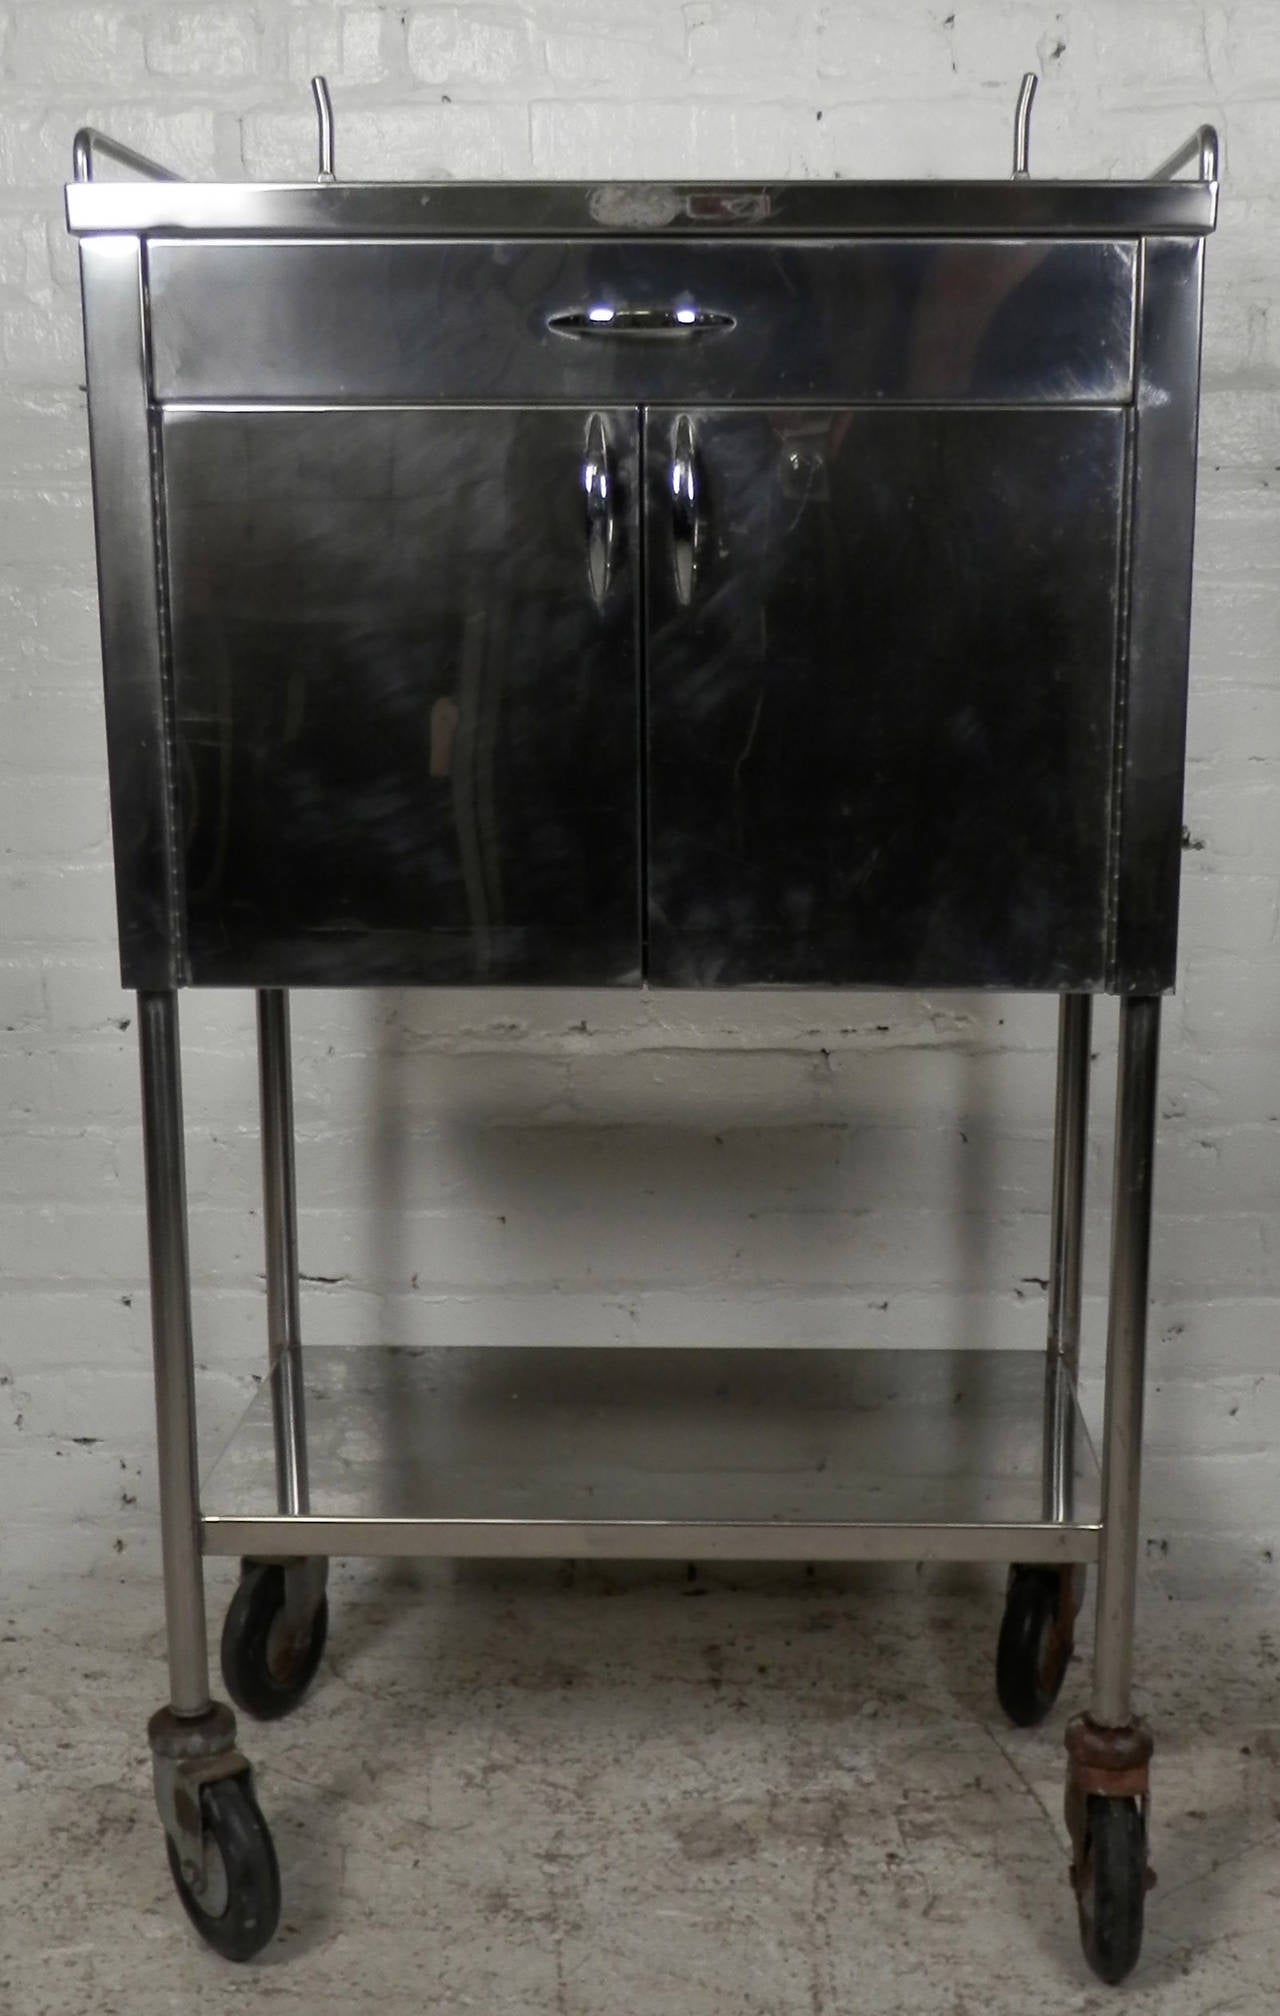 Polished stainless steel medical cart on wheels featuring one drawer and a two door cabinet revealing one metal shelf inside. Makes a great addition to your modern bathroom.

(Please confirm item location - NY or NJ - with dealer)